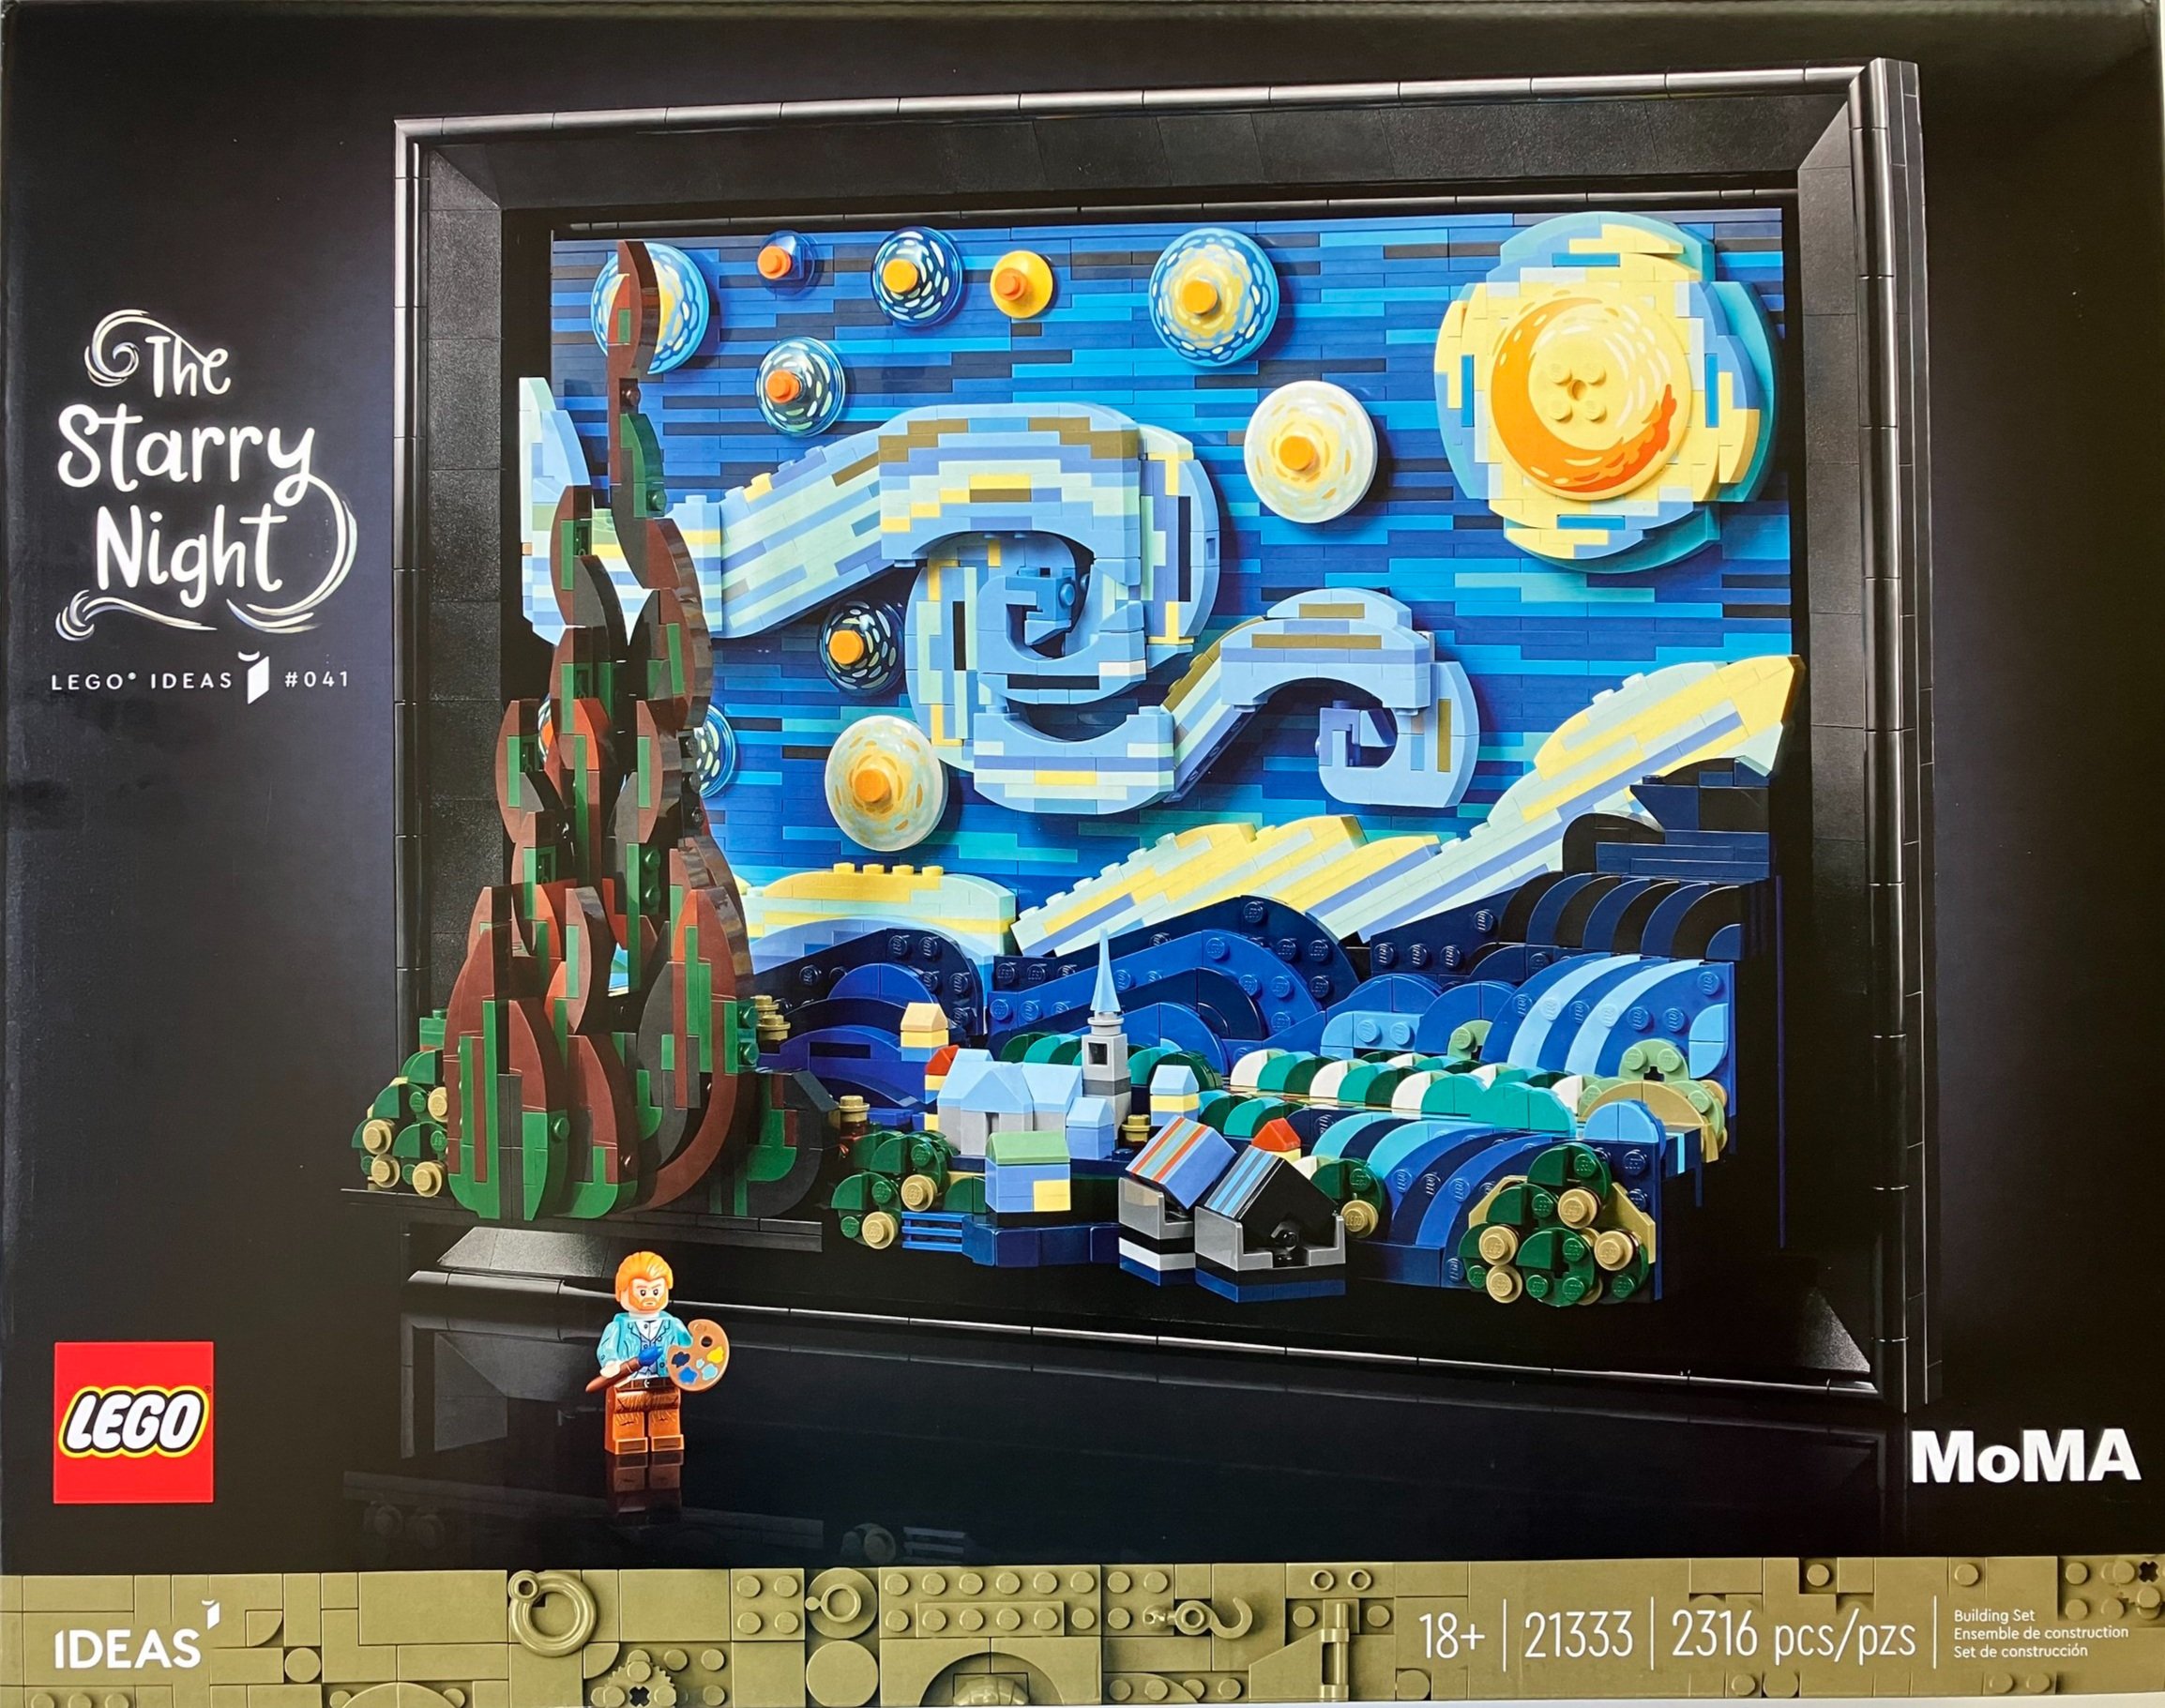 Only in the Blue Night – LEGO Ideas, Vincent van Gogh – The Starry Night  (21333)